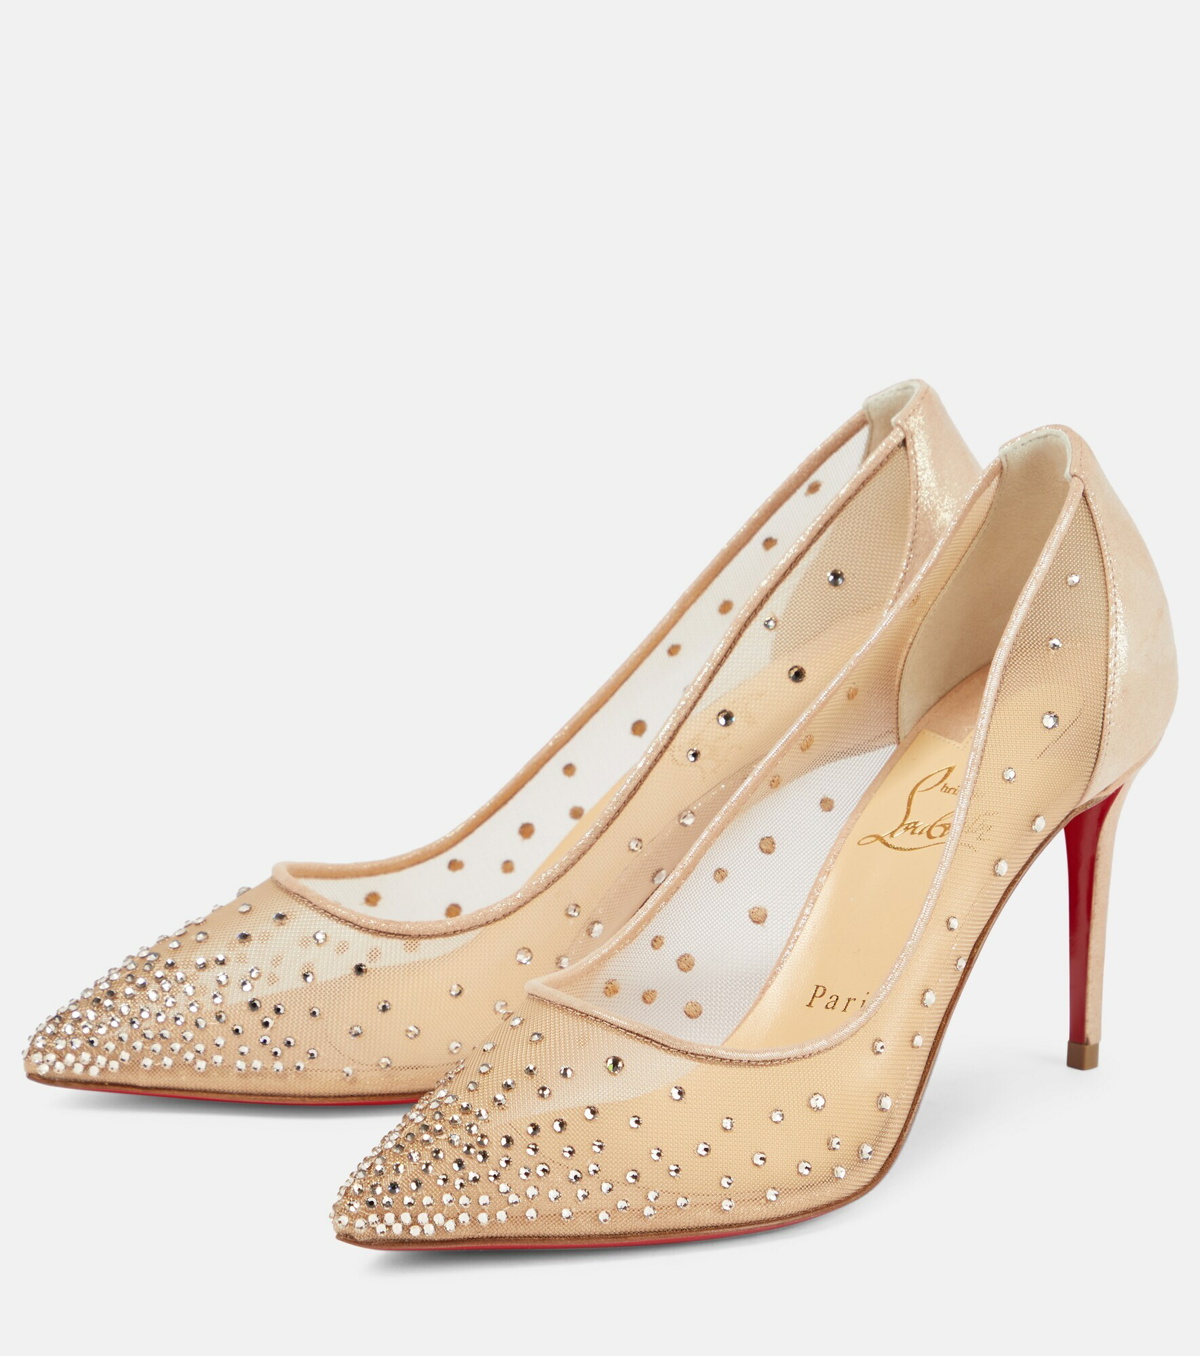 Christian Louboutin Strass Pump Leather Upper Heels for Women for